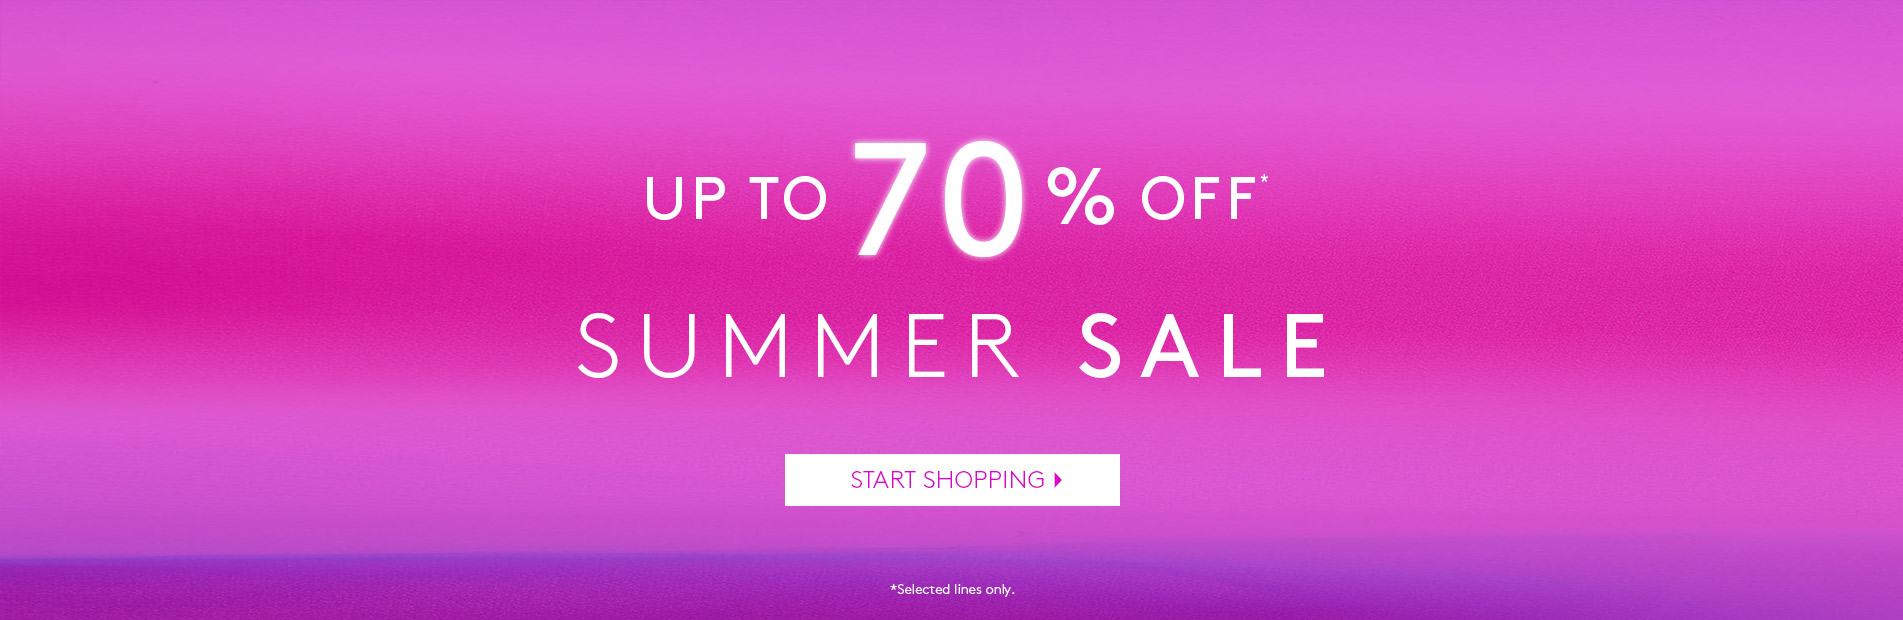 Studio 8: Summer Sale up to 70% off dresses, tops, trousers, skirts, knitwears, jackets and accessories